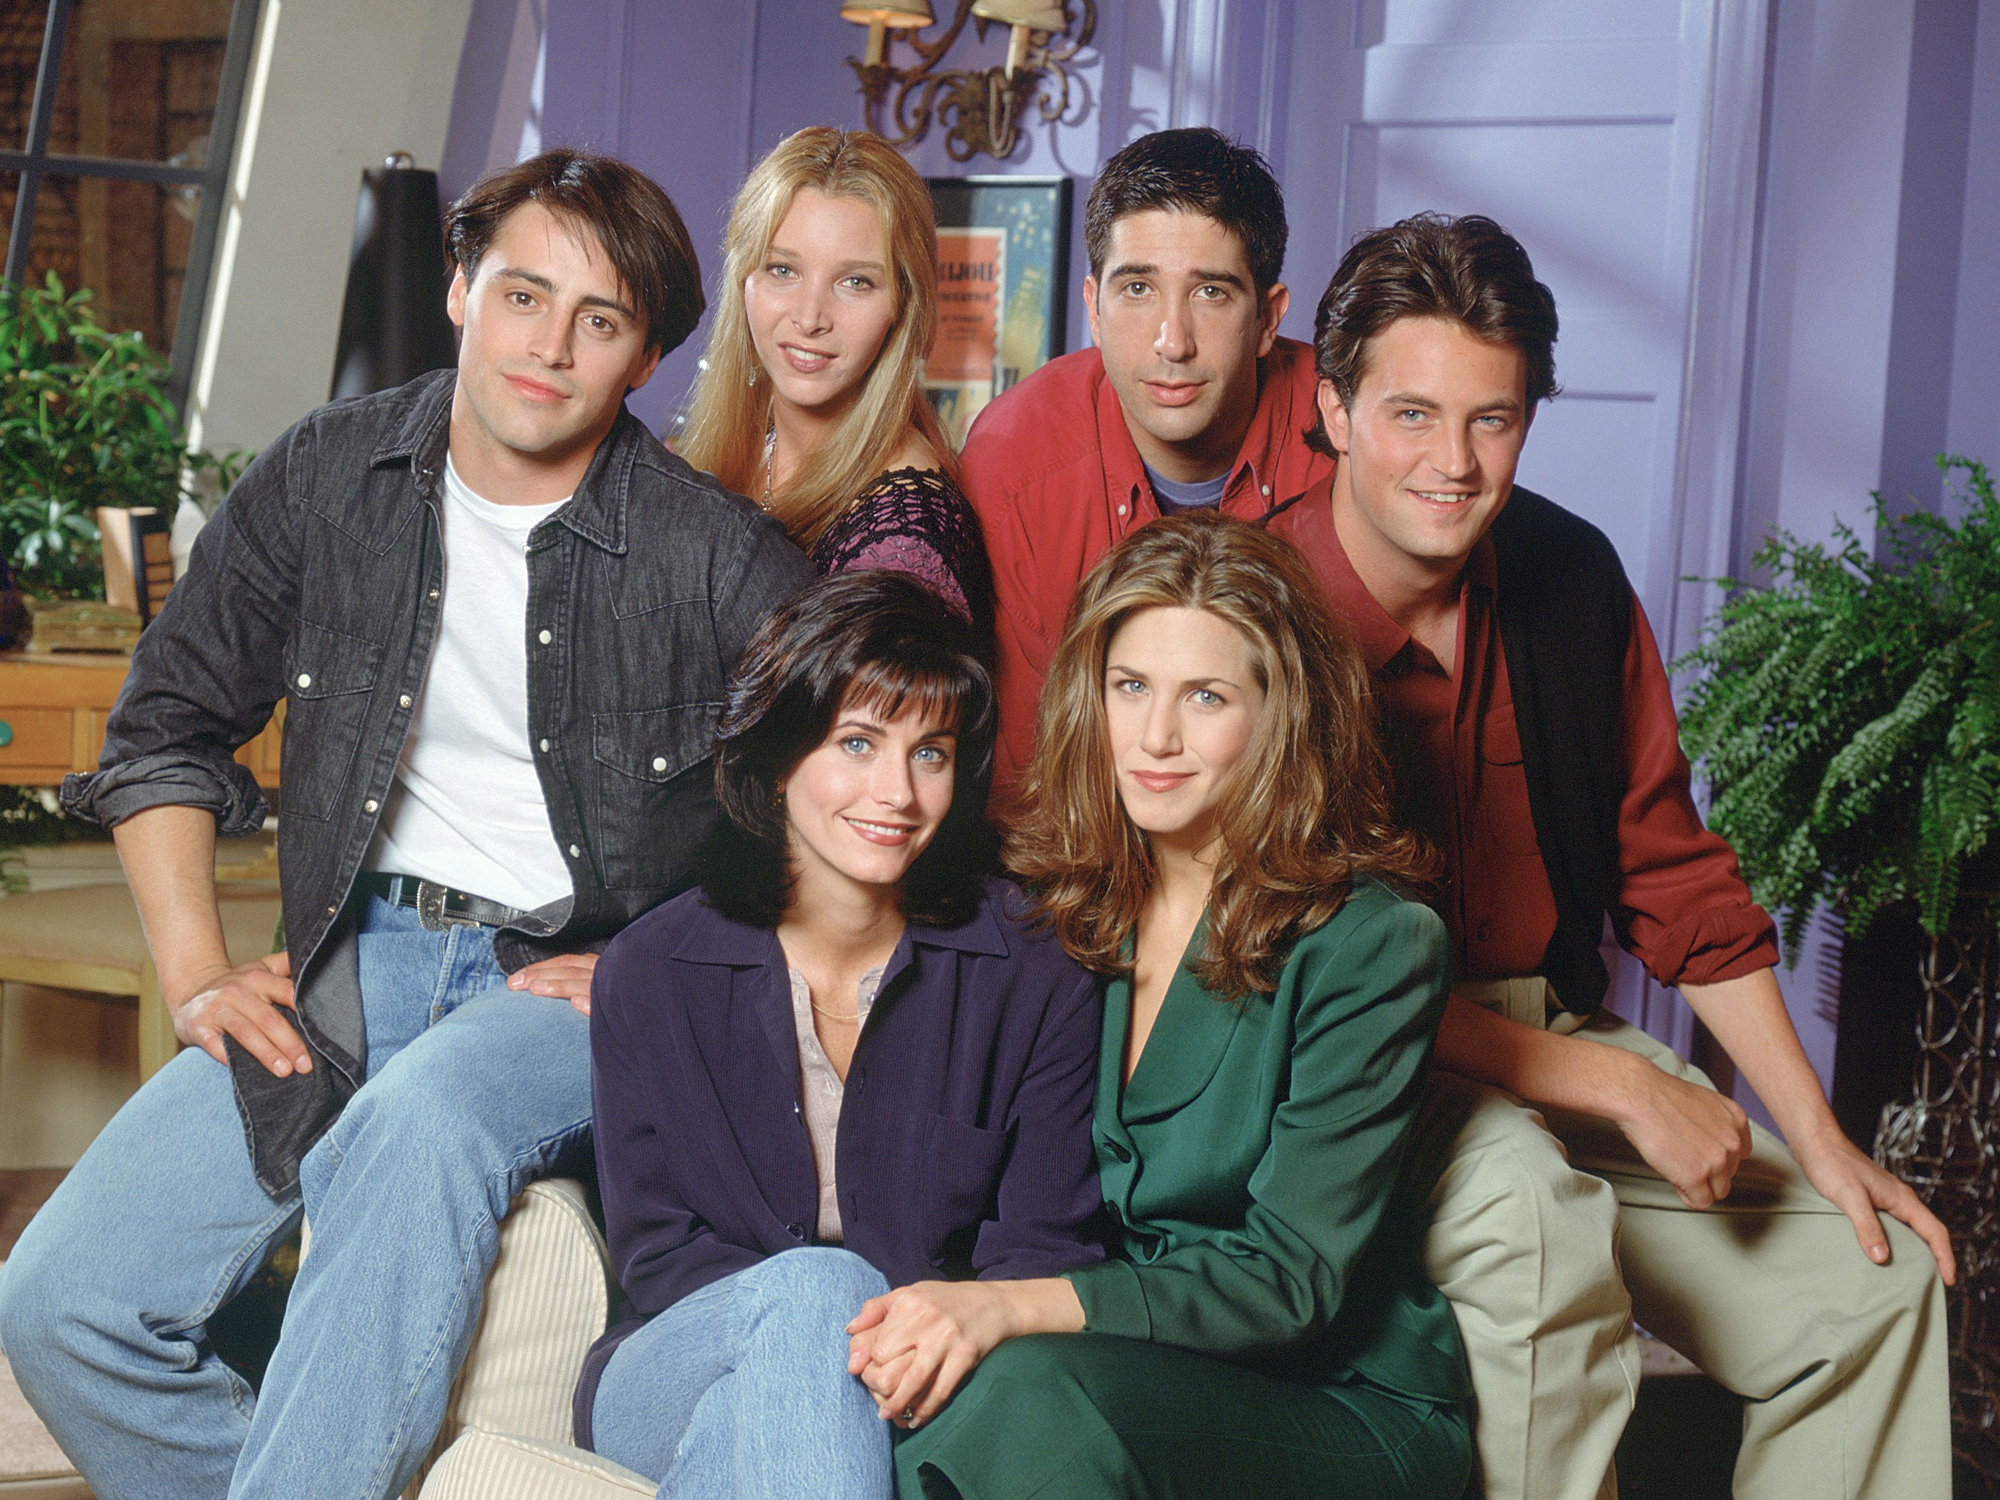 Friends Wallpapers, Pictures, Images